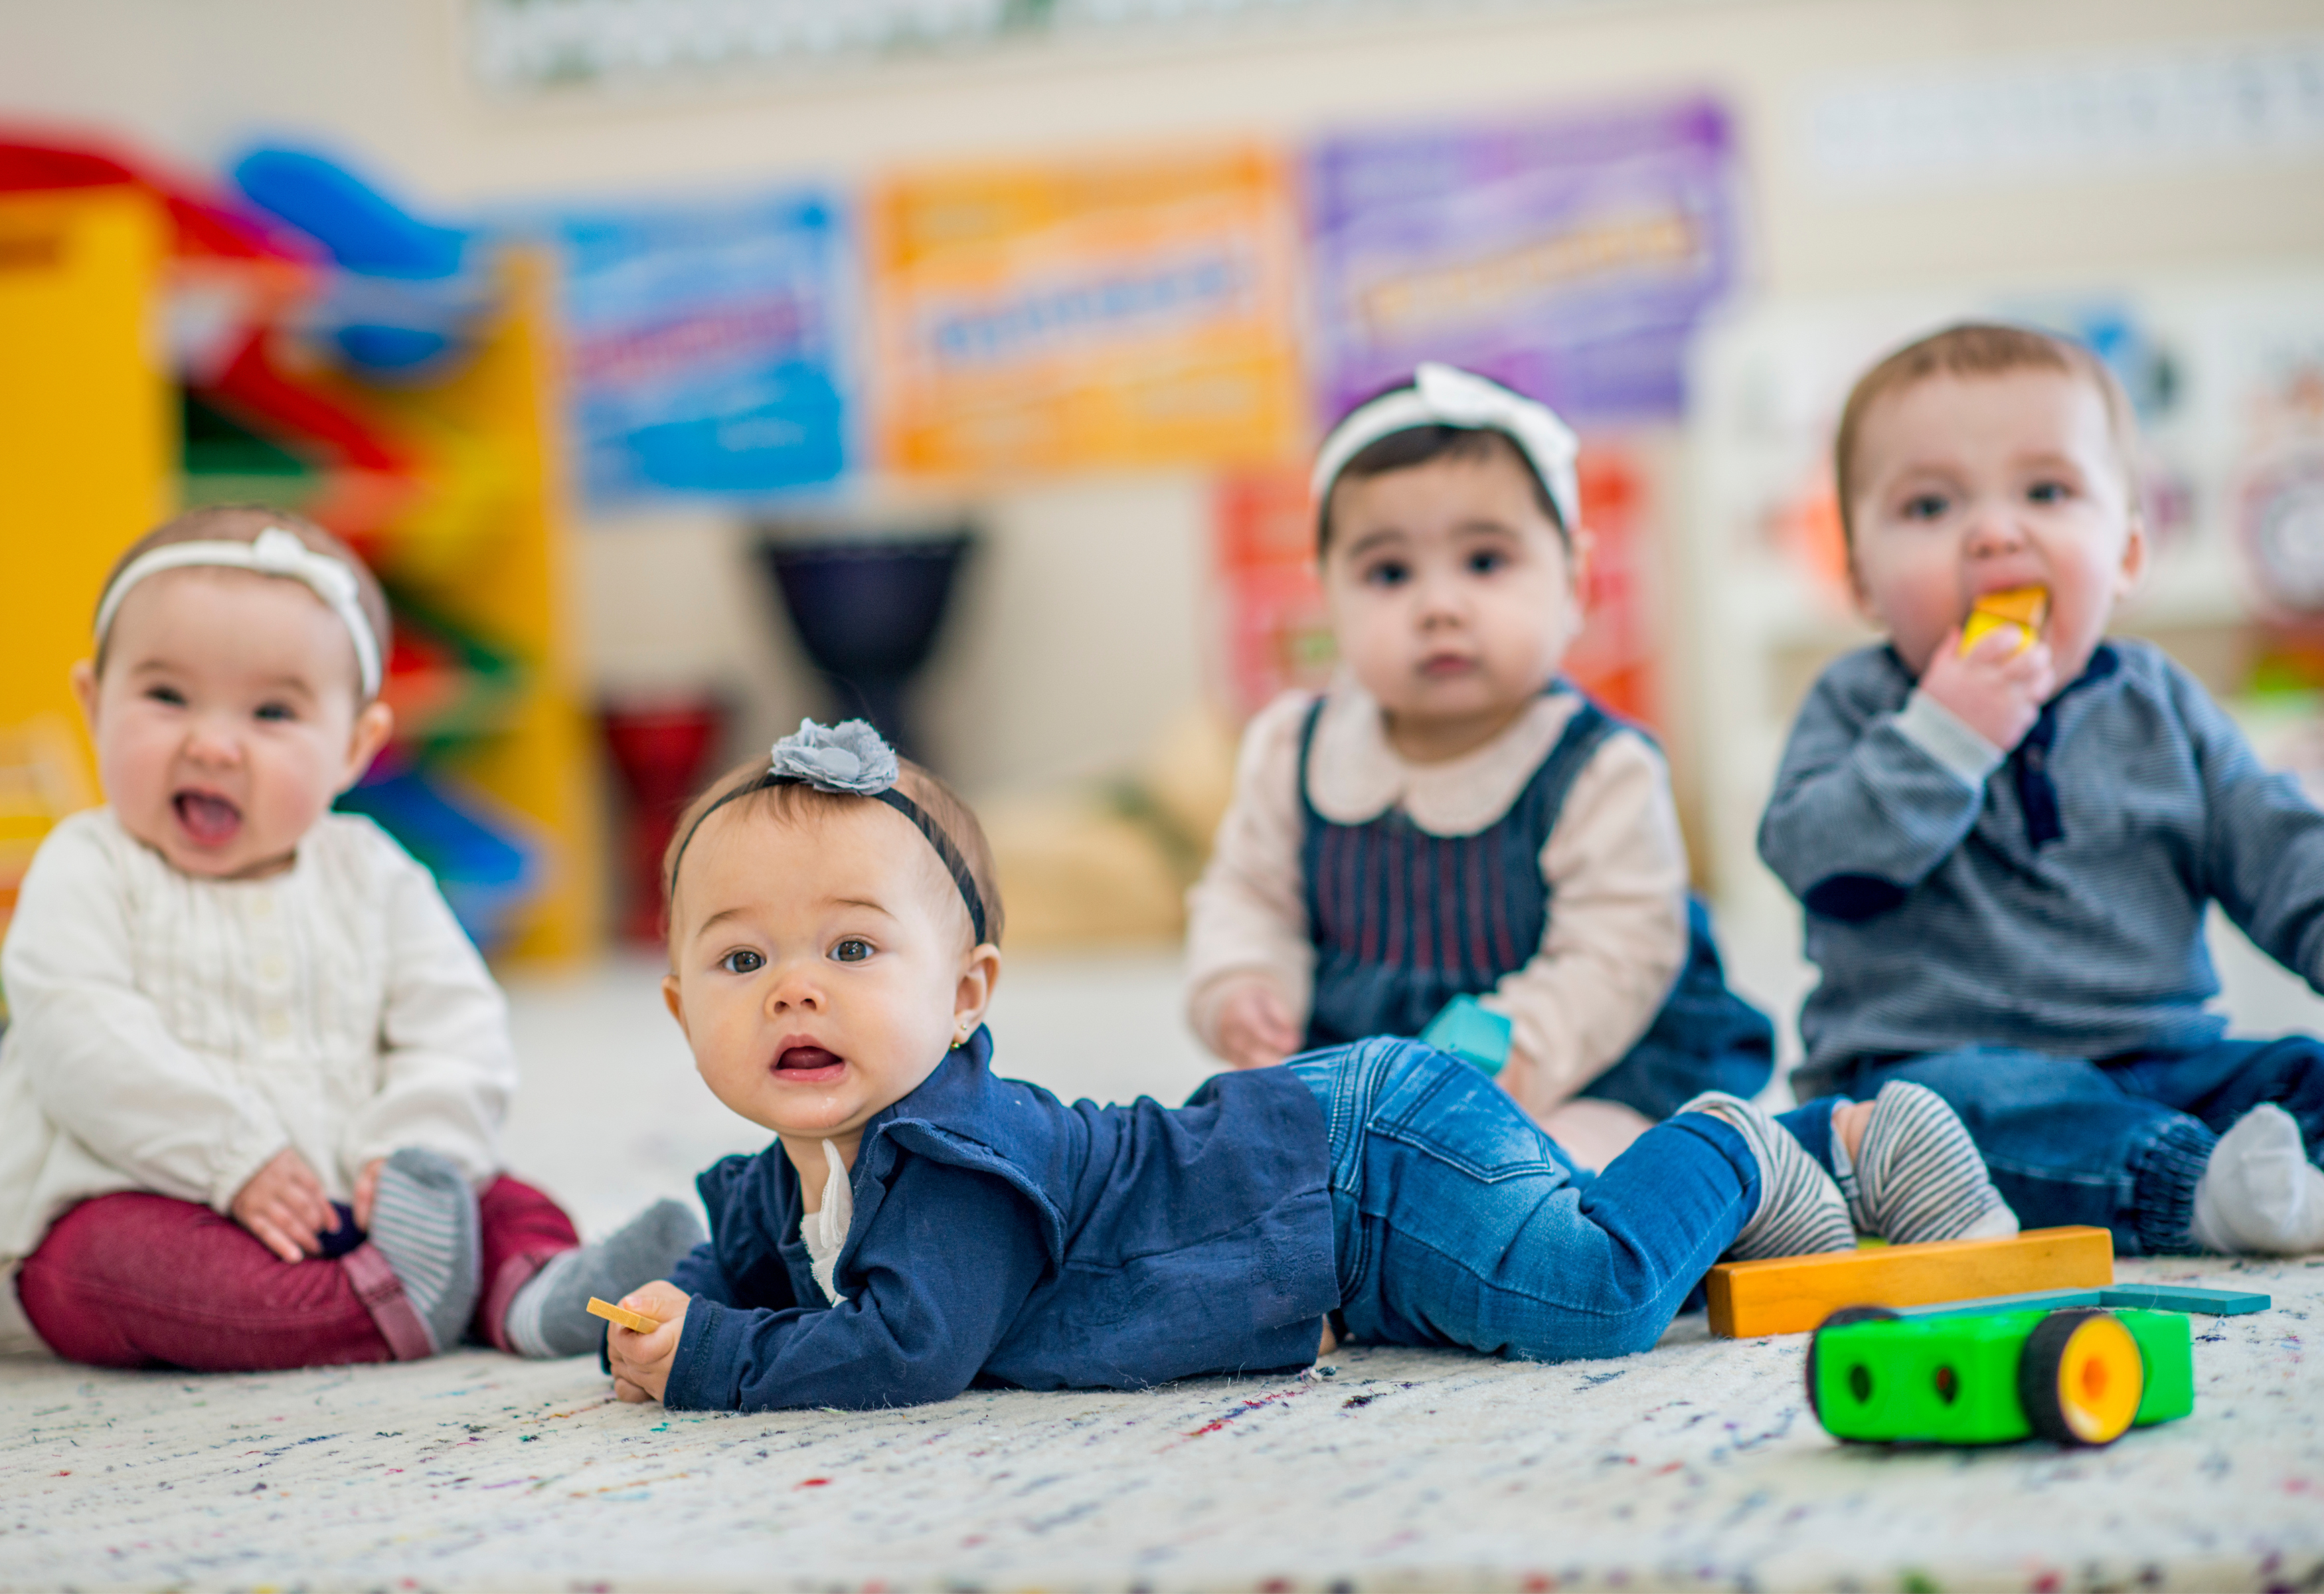 Photo of four babies on the floor attentively looking at something out of view